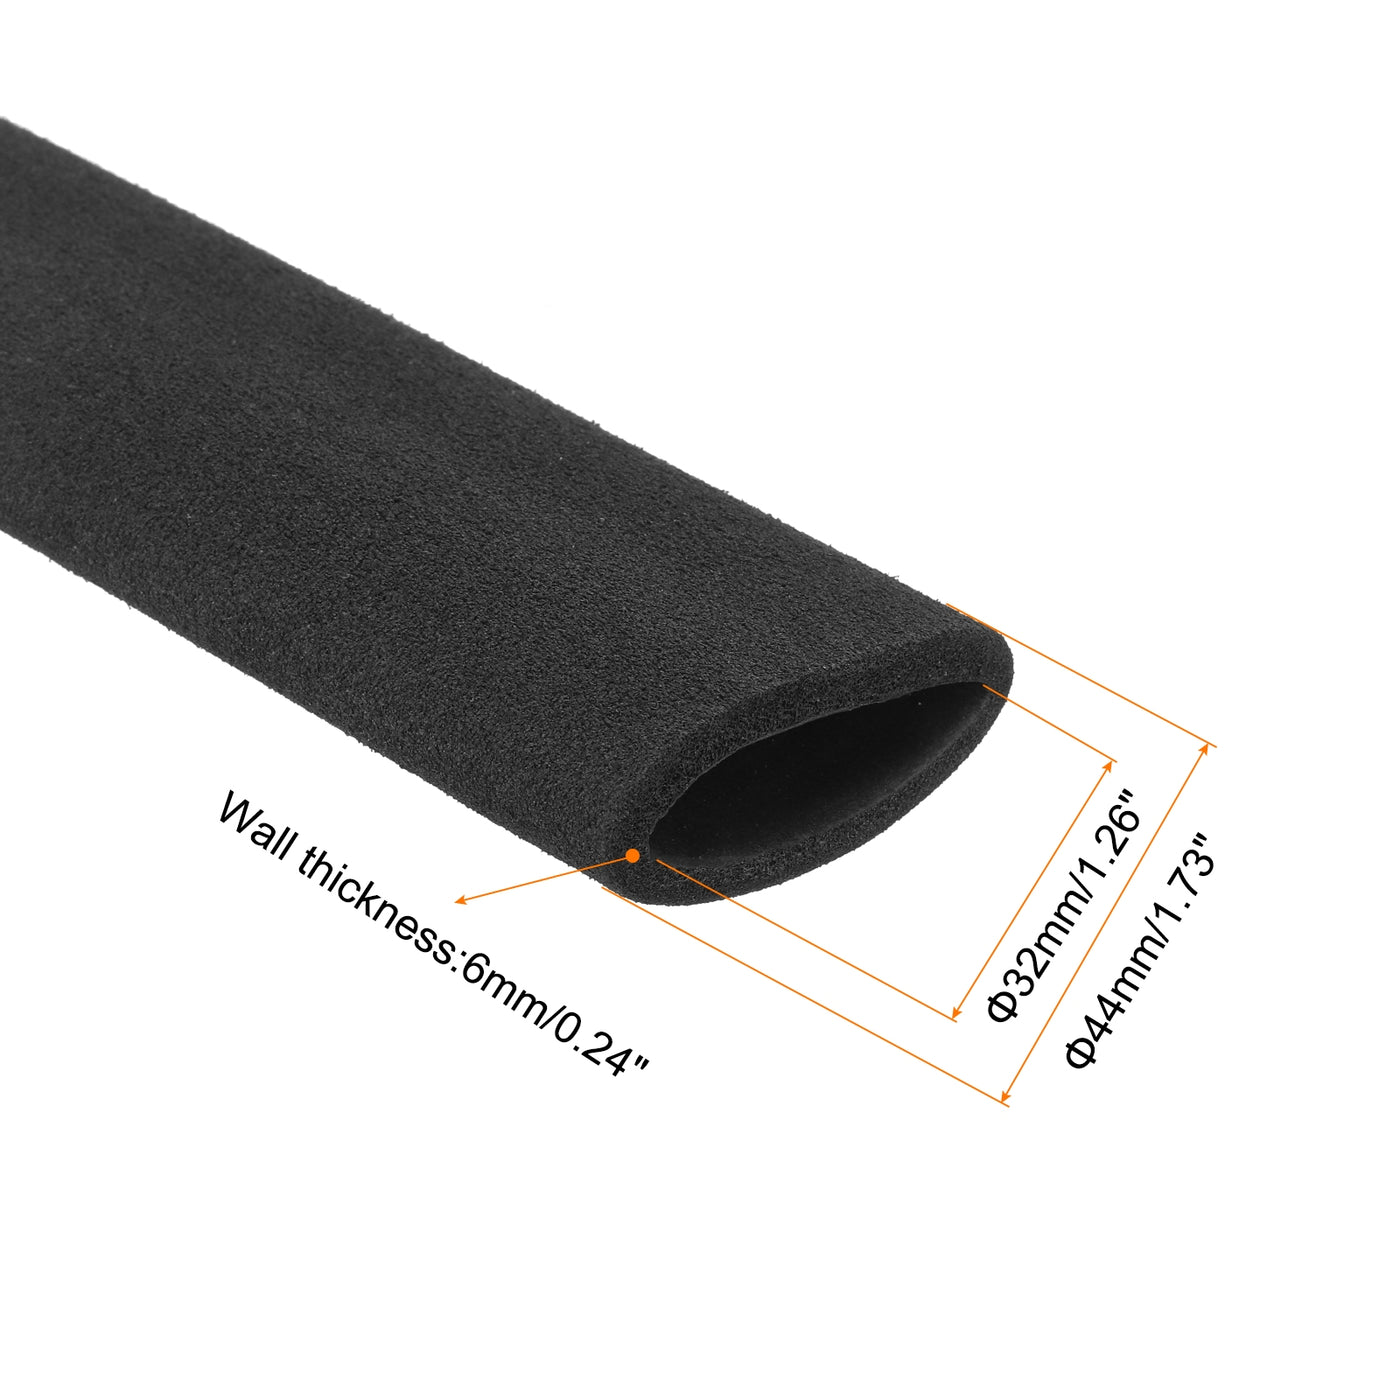 uxcell Uxcell Pipe Insulation Tube Foam Tubing for Handle Grip Support 32mm ID 44mm OD 300mm Heat Preservation Black 2pcs